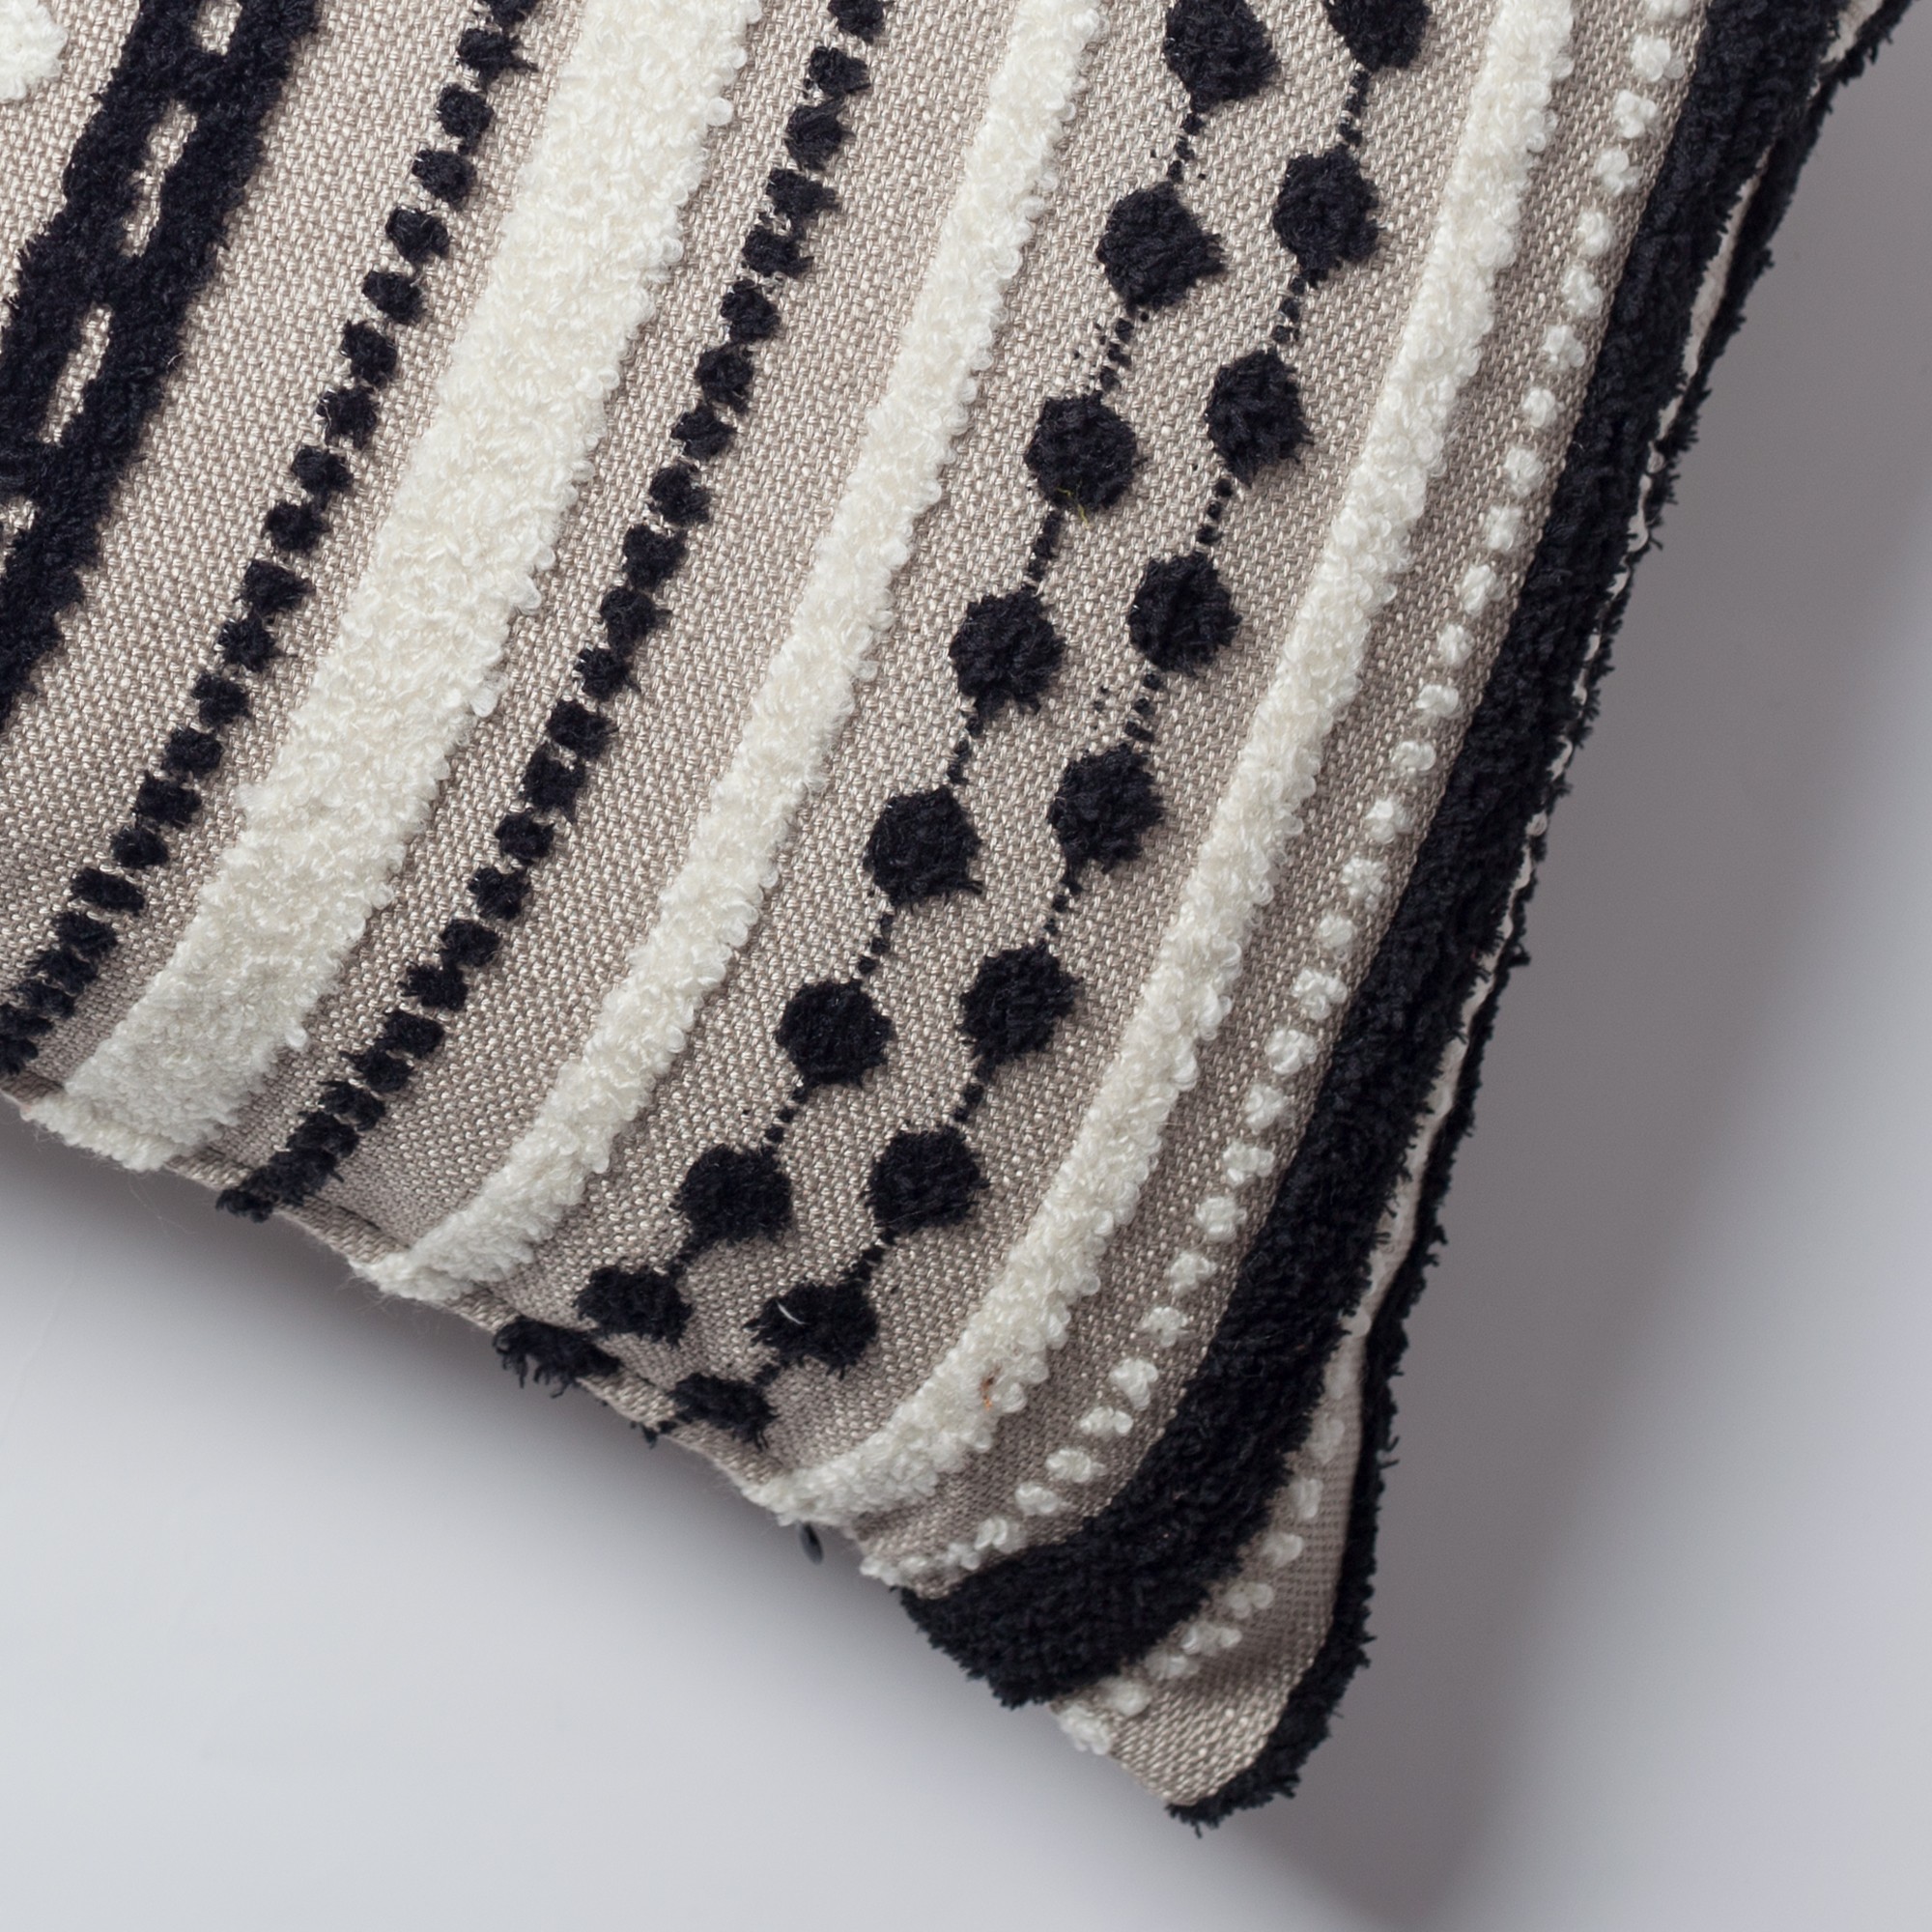 "Nomad" - Multicolored Striped Linen Decorative Pillow 16x24 Inch - Black & White (Cover Only)